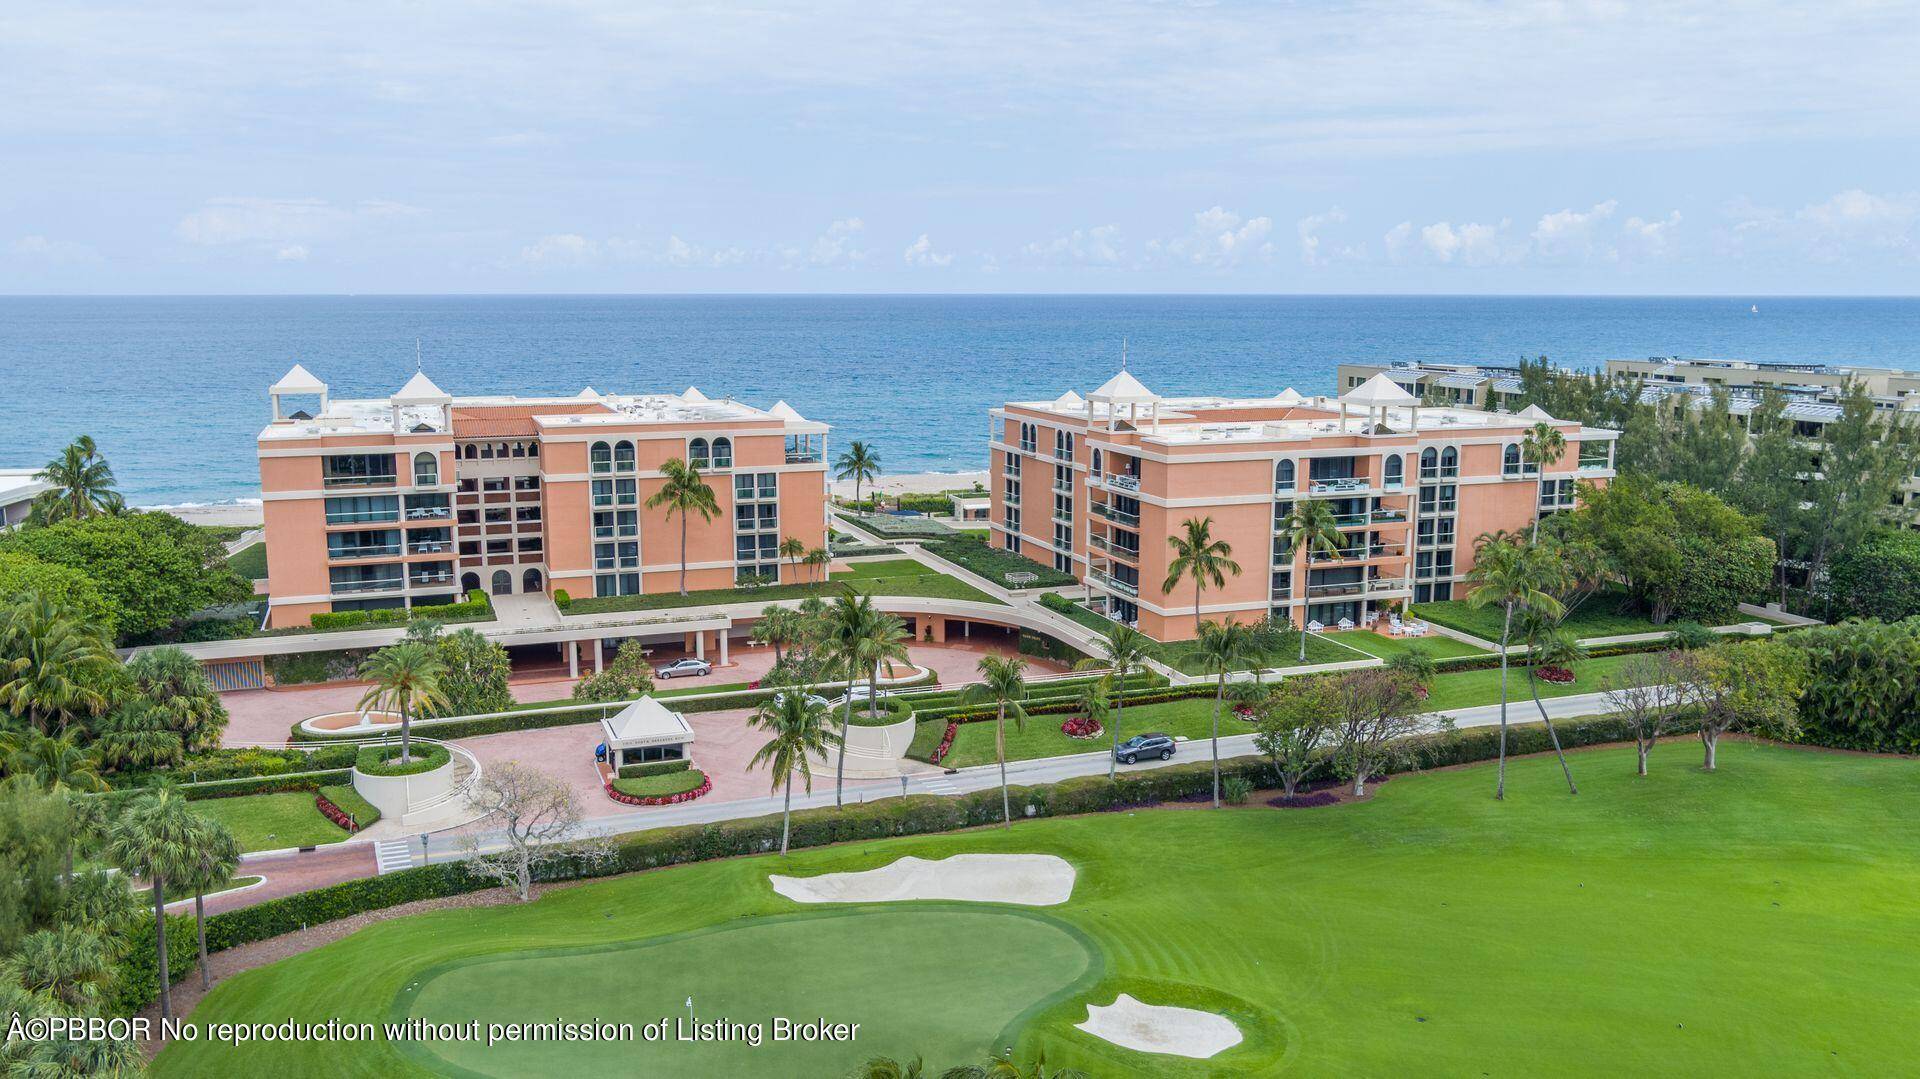 Extraordinary sunset views over expansive lawn and palm trees and Breaker's golf course.